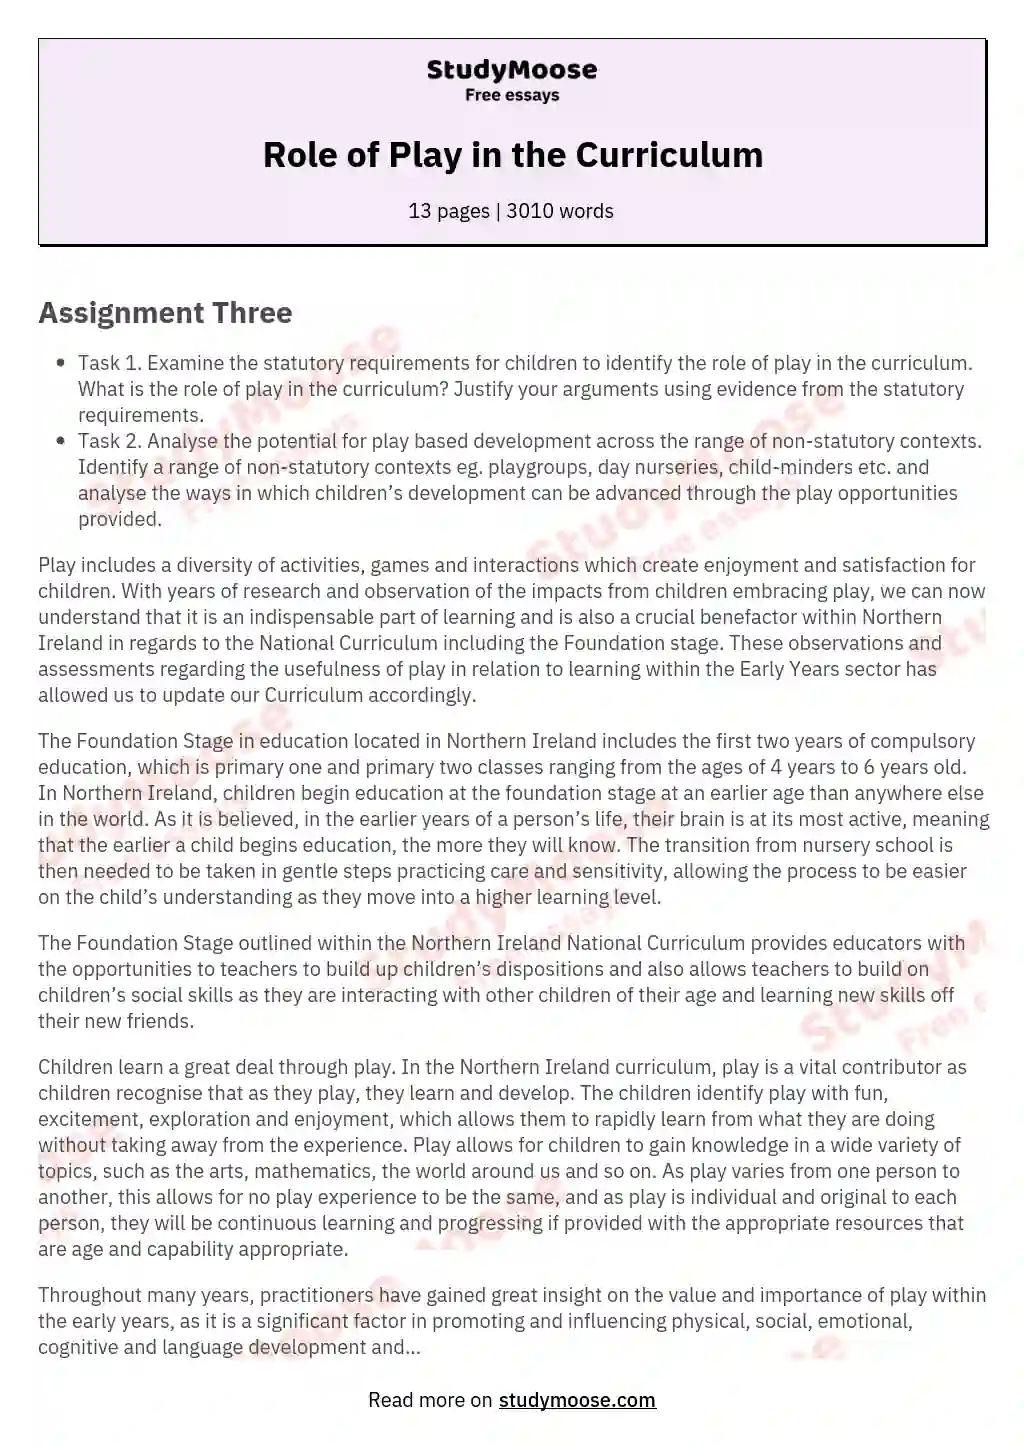 Role of Play in the Curriculum essay